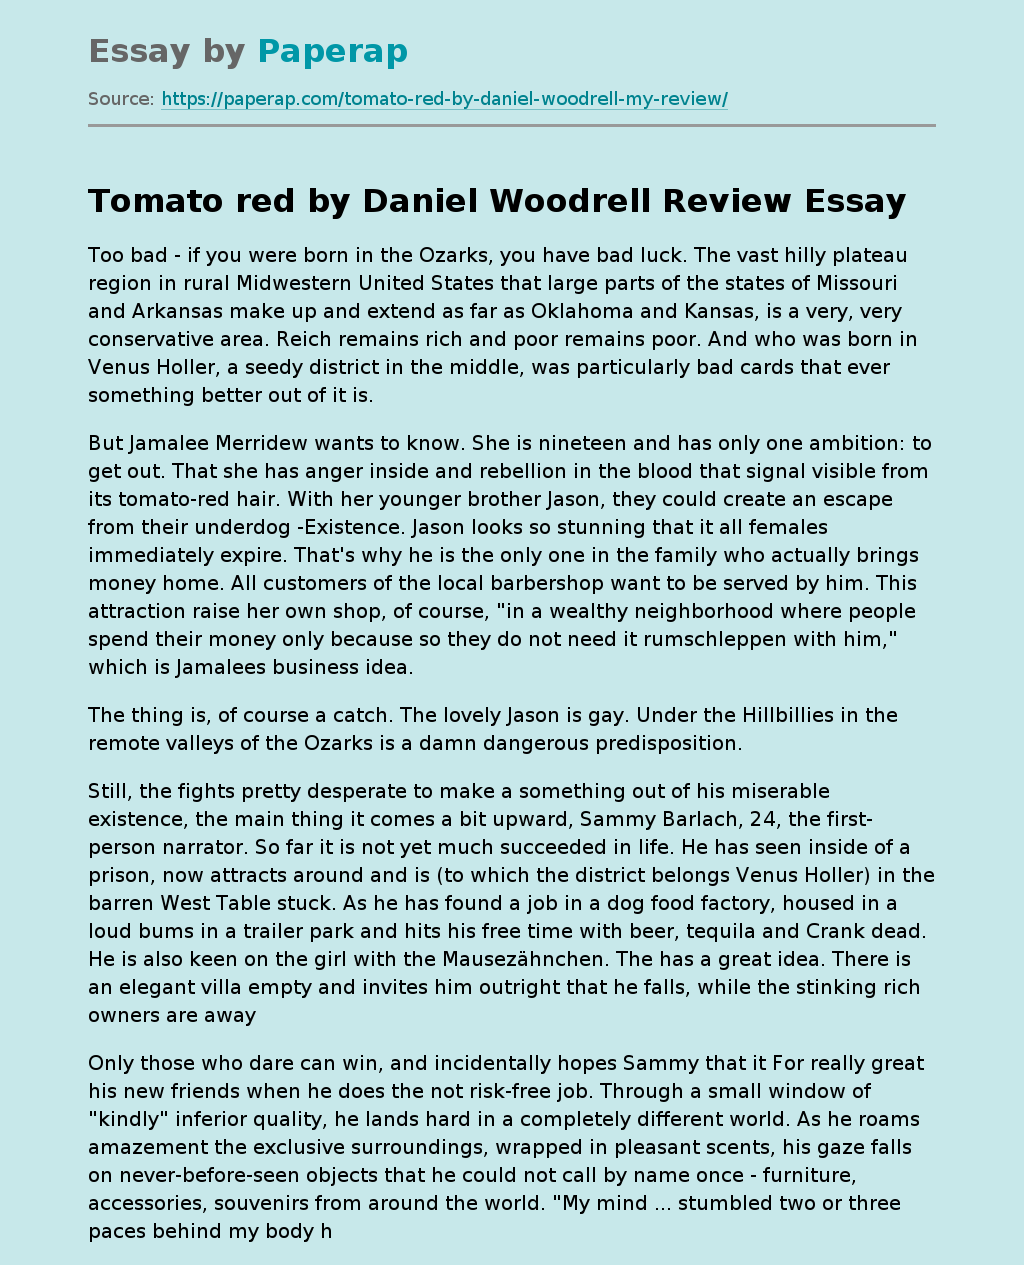 Tomato red by Daniel Woodrell Review